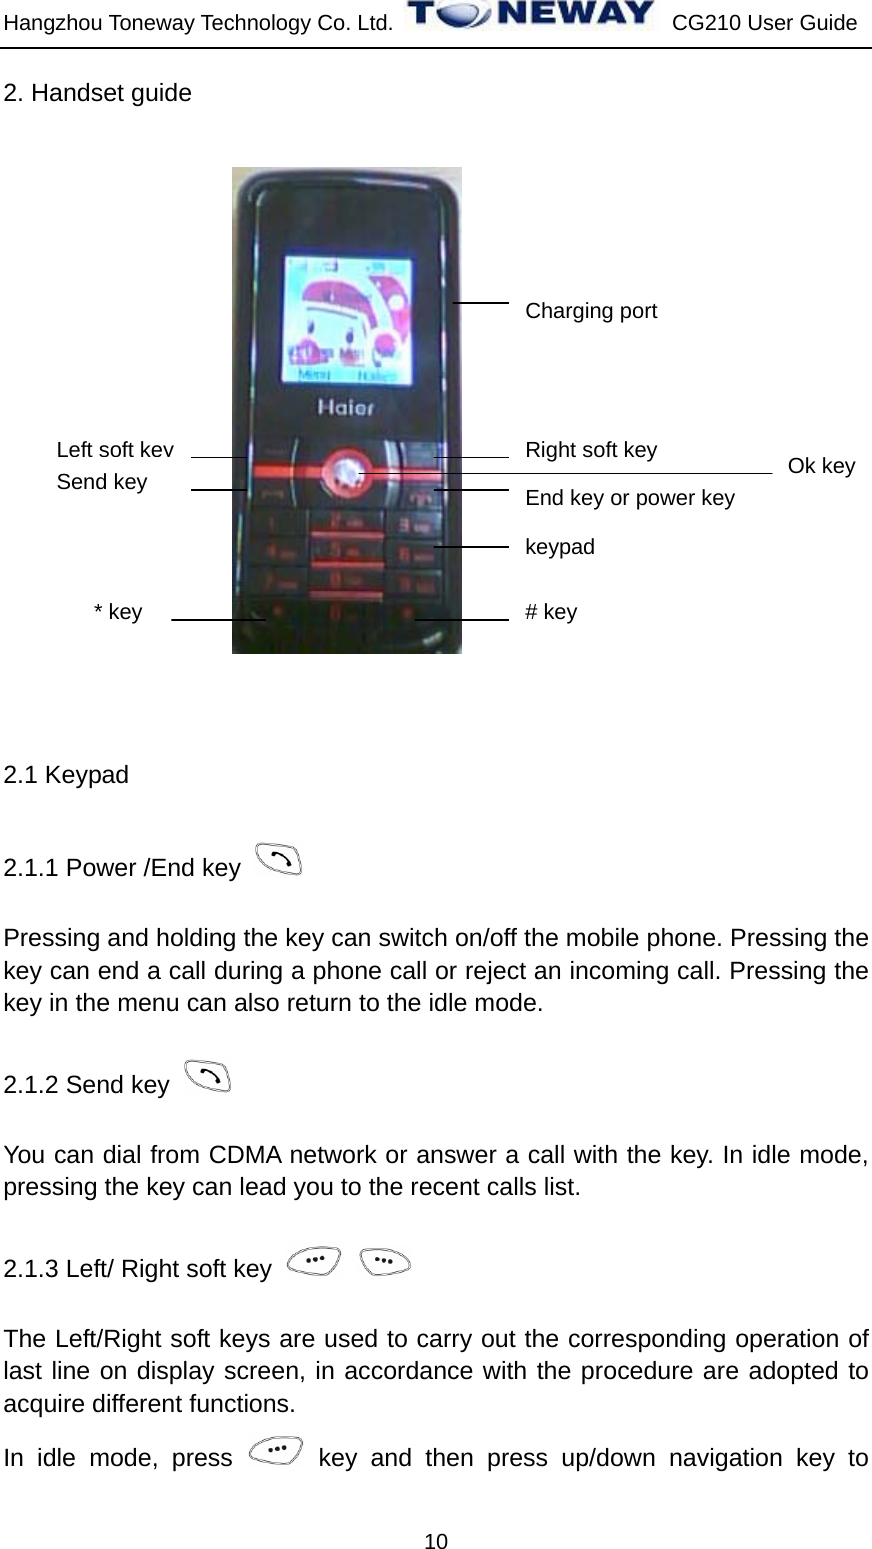 Hangzhou Toneway Technology Co. Ltd.    CG210 User Guide 10 2. Handset guide    2.1 Keypad 2.1.1 Power /End key   Pressing and holding the key can switch on/off the mobile phone. Pressing the key can end a call during a phone call or reject an incoming call. Pressing the key in the menu can also return to the idle mode. 2.1.2 Send key   You can dial from CDMA network or answer a call with the key. In idle mode, pressing the key can lead you to the recent calls list. 2.1.3 Left/ Right soft key     The Left/Right soft keys are used to carry out the corresponding operation of last line on display screen, in accordance with the procedure are adopted to acquire different functions.   In idle mode, press   key and then press up/down navigation key to Left soft key Send key * key Right soft key End key or power key keypad # key Ok key Charging port 